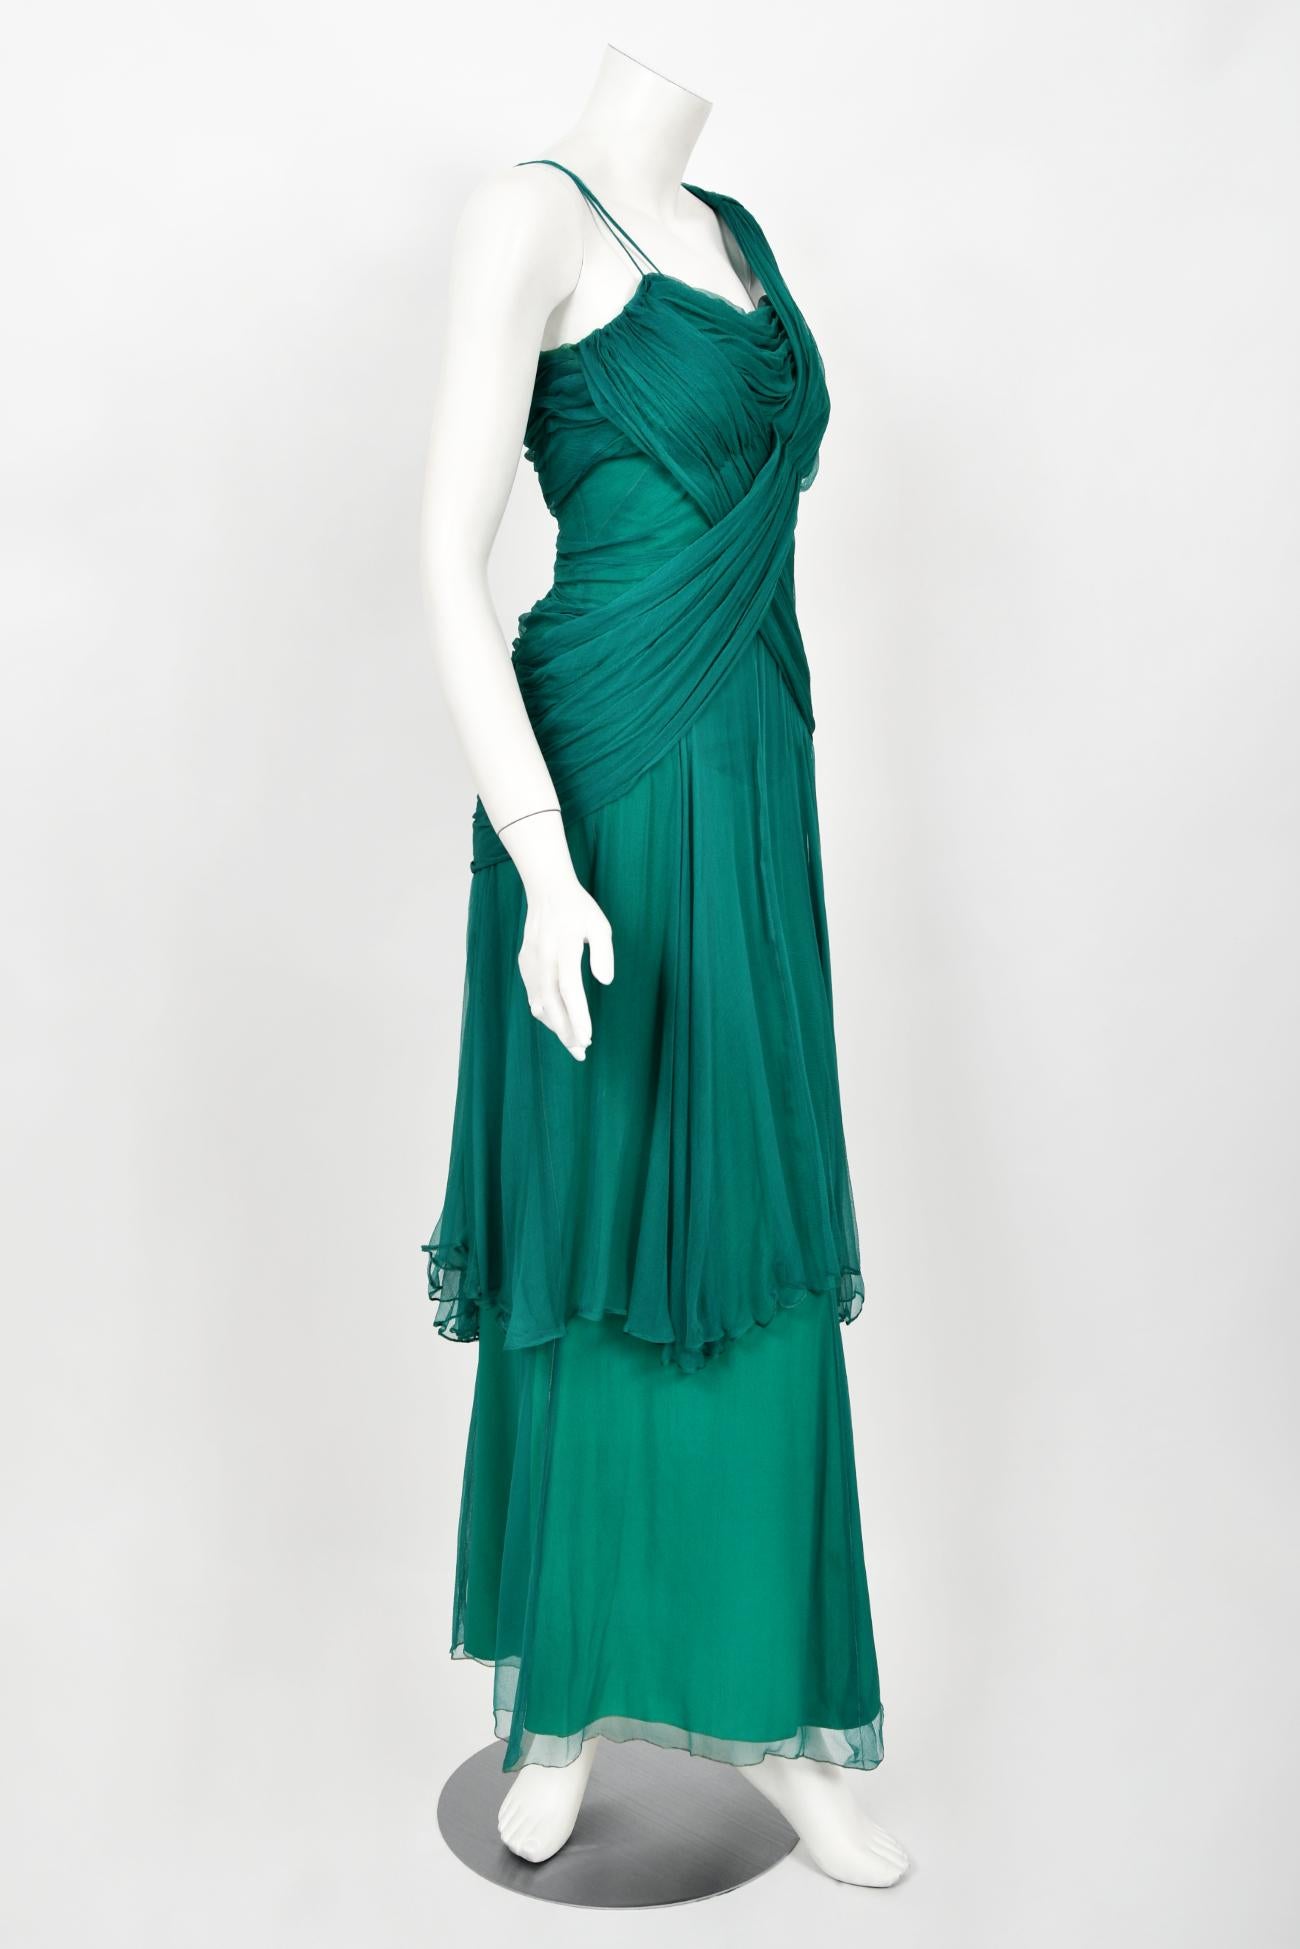 Vintage 1950's Irene Lentz Couture Teal Green Draped Silk Grecian Goddess Gown For Sale 4